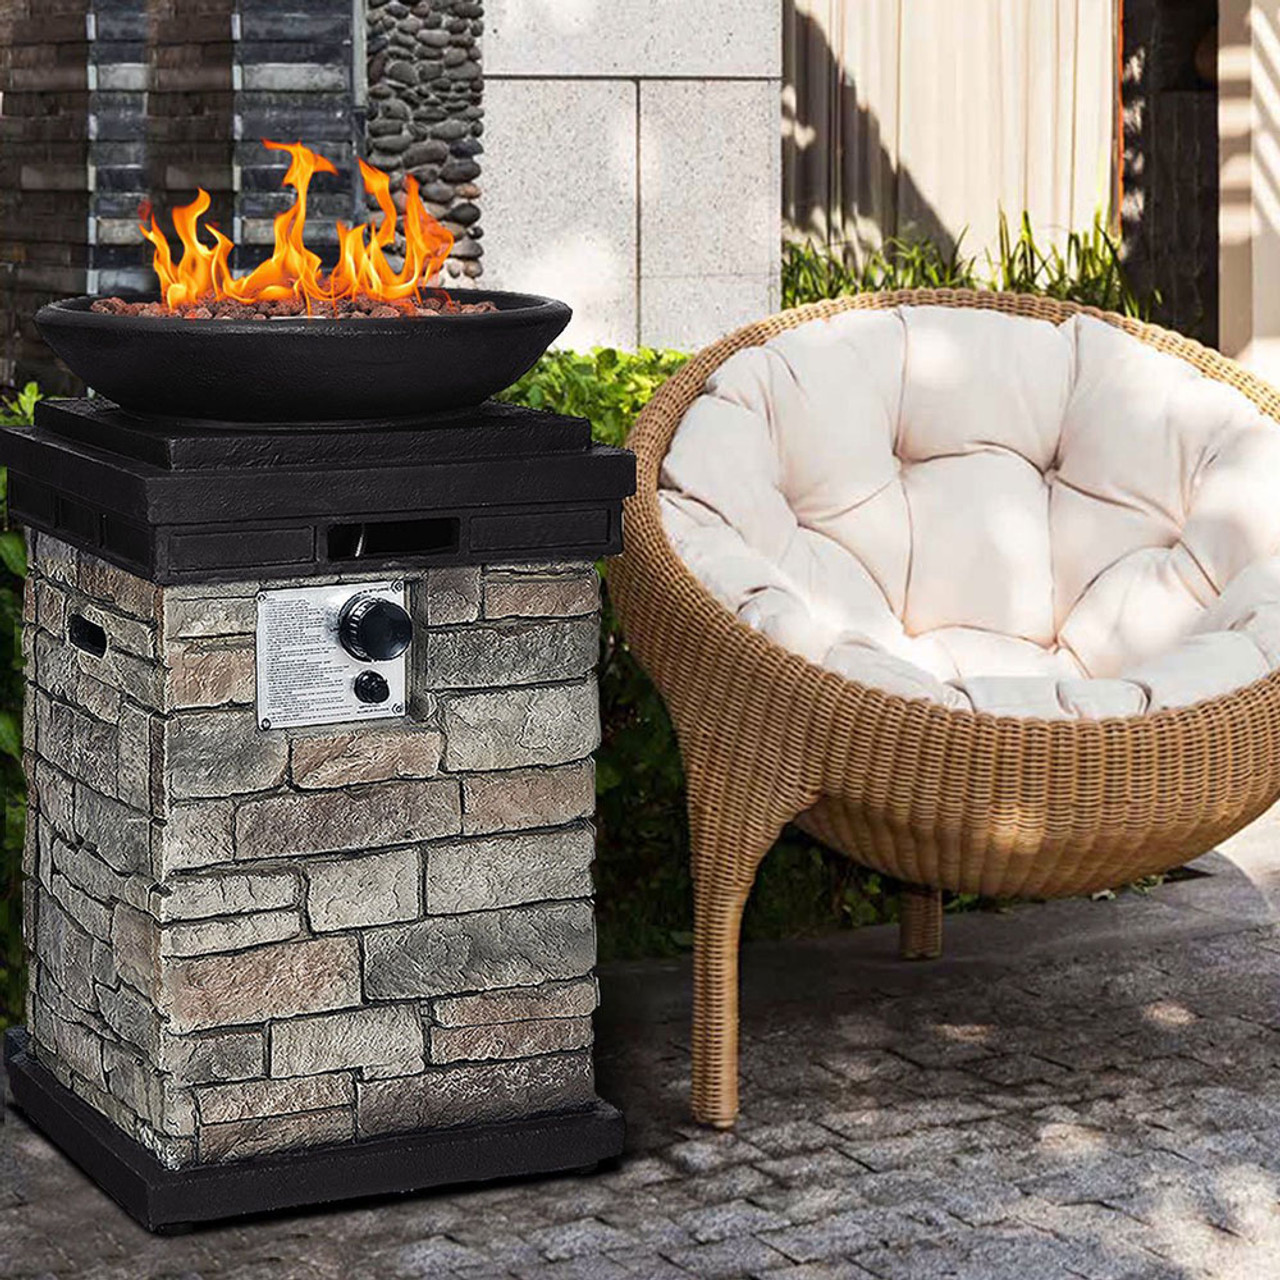 Propane Fire Bowl with Lava Rocks, Electronics Starter & Weather Cover product image